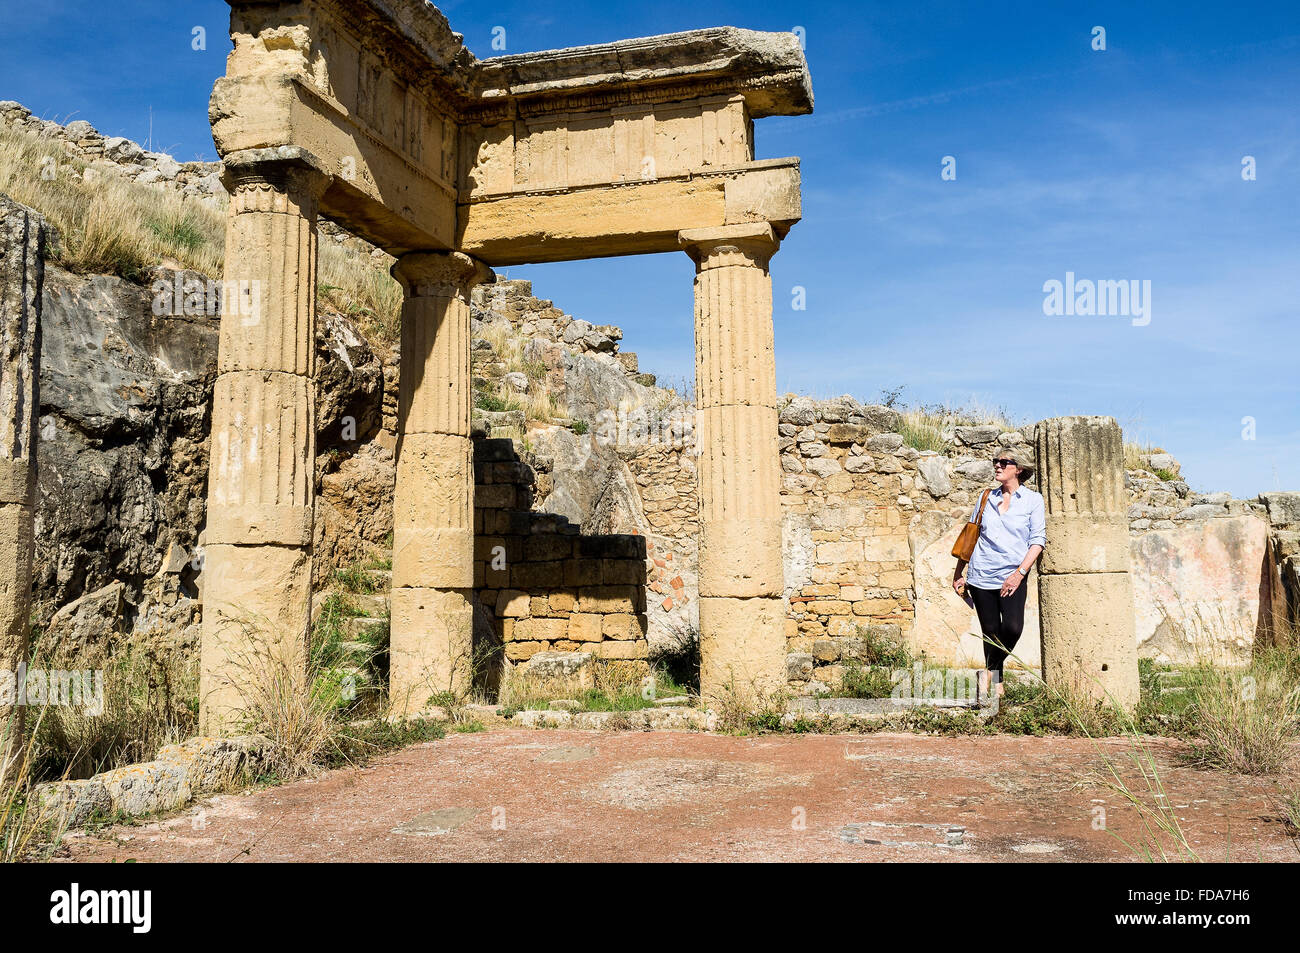 Archaeological Greco-Roman site of Solunto in Sicily, Italy Stock Photo